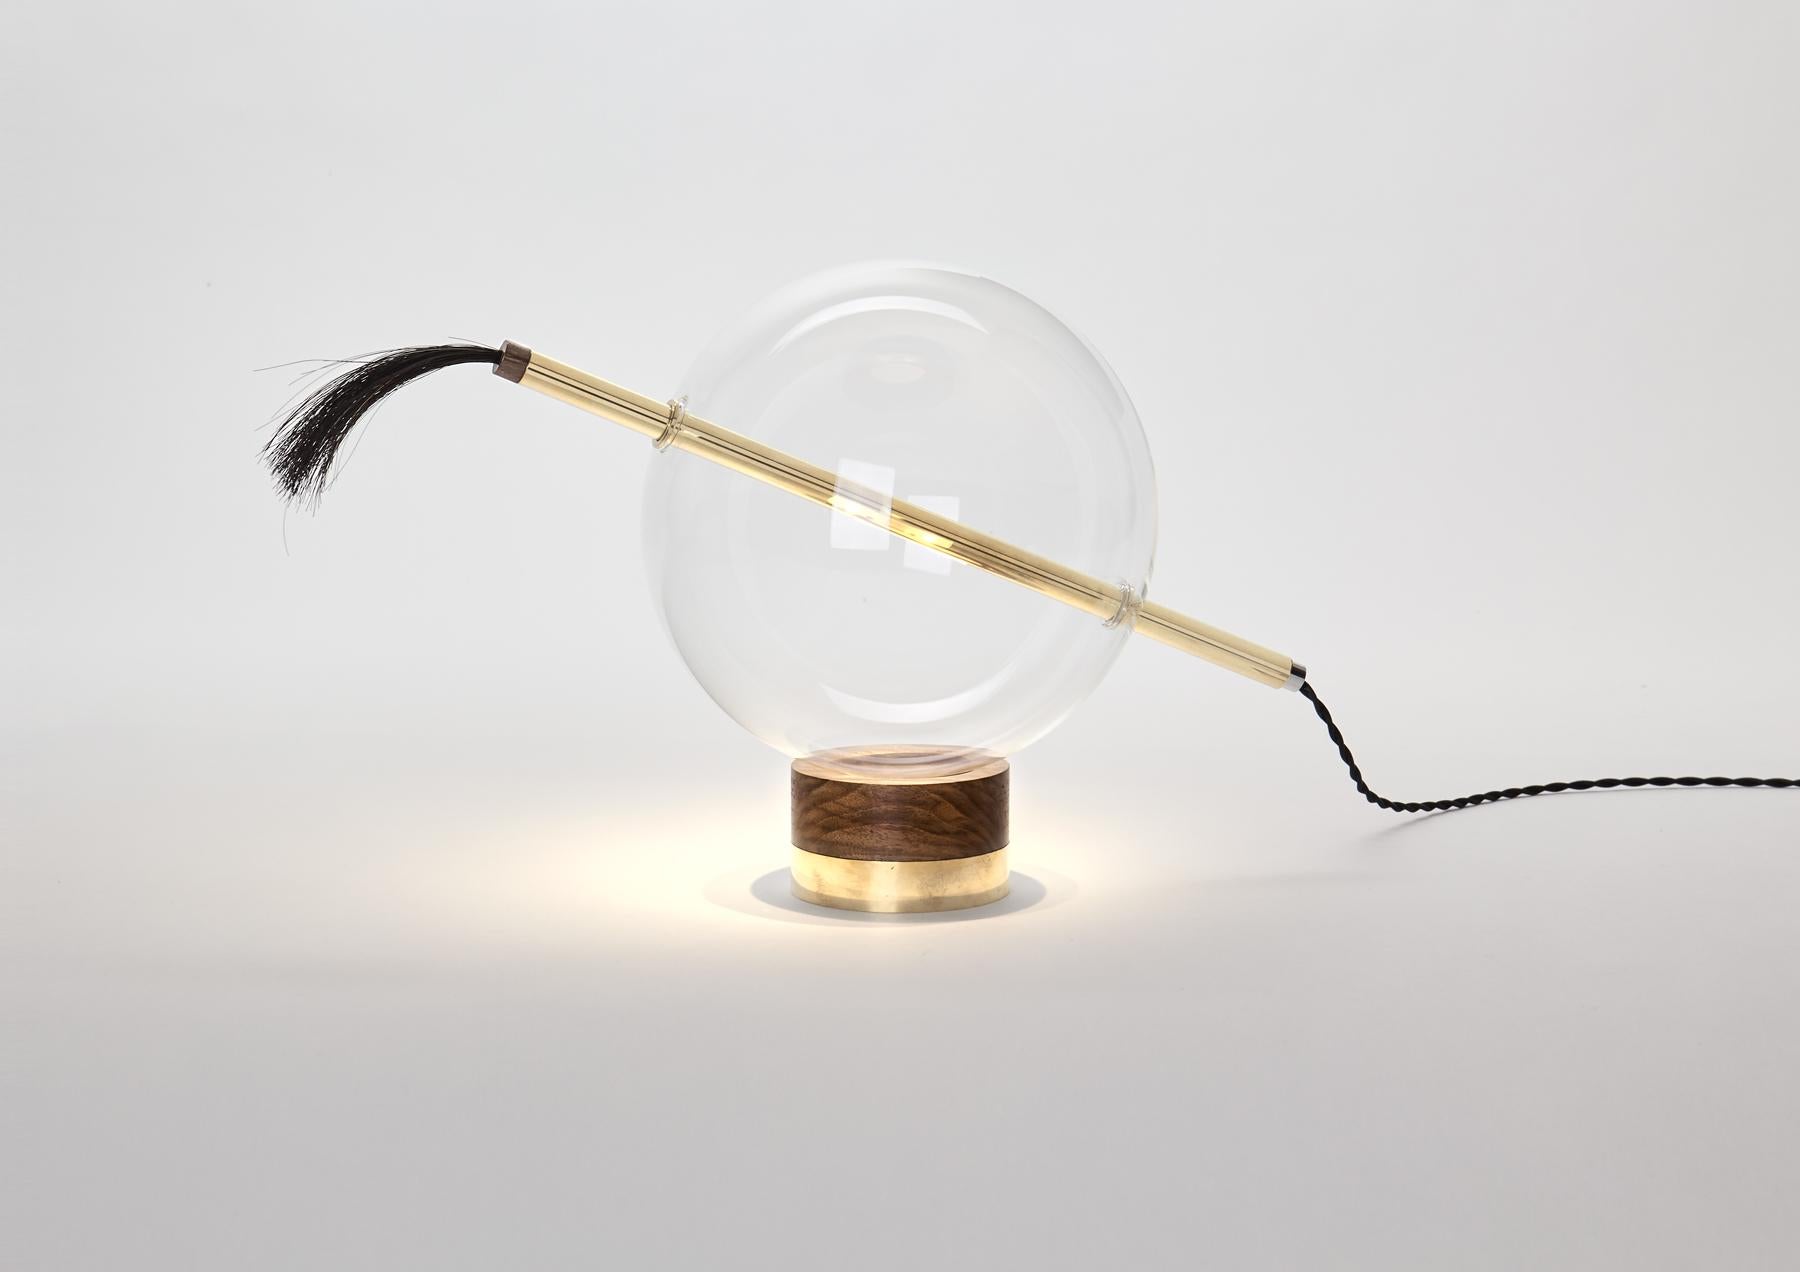 Designed to be positioned on a console table or to suggestively light up a corner on the floor, the Globo Neptune enjoys a particularly simple, flexible relationship with its Domestic Environment.
The light gets out from the brass rod crossing over